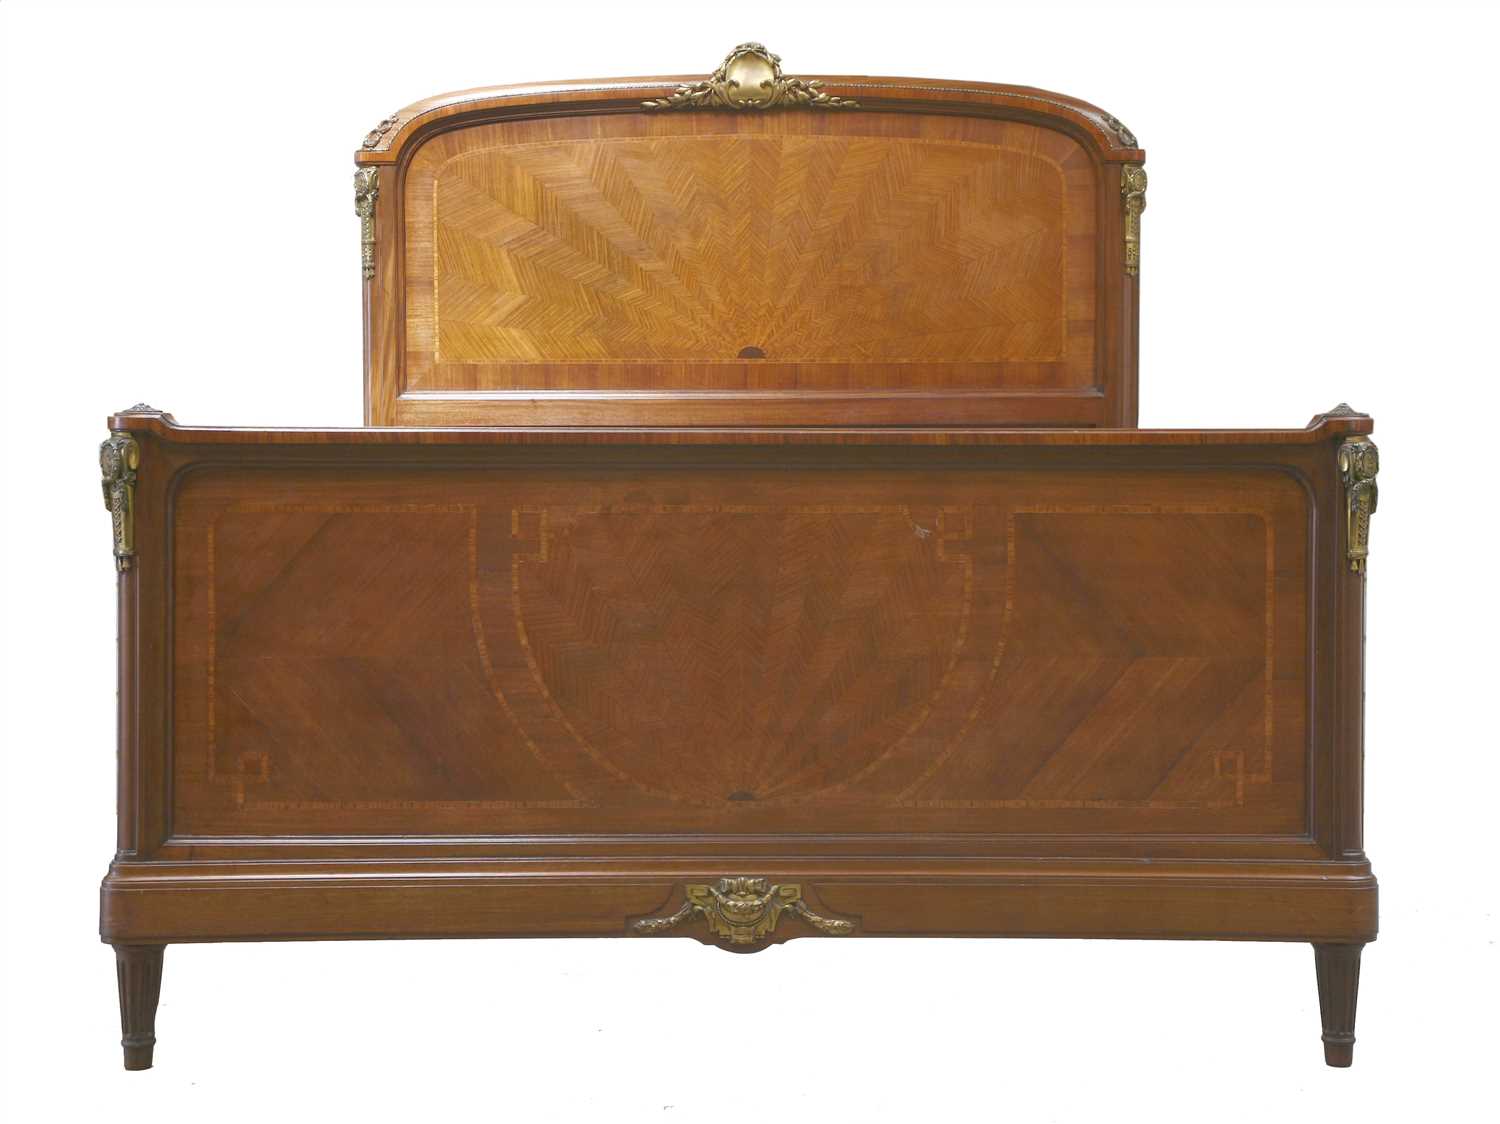 Lot 300 - A French parquetry and inlaid mahogany double bed